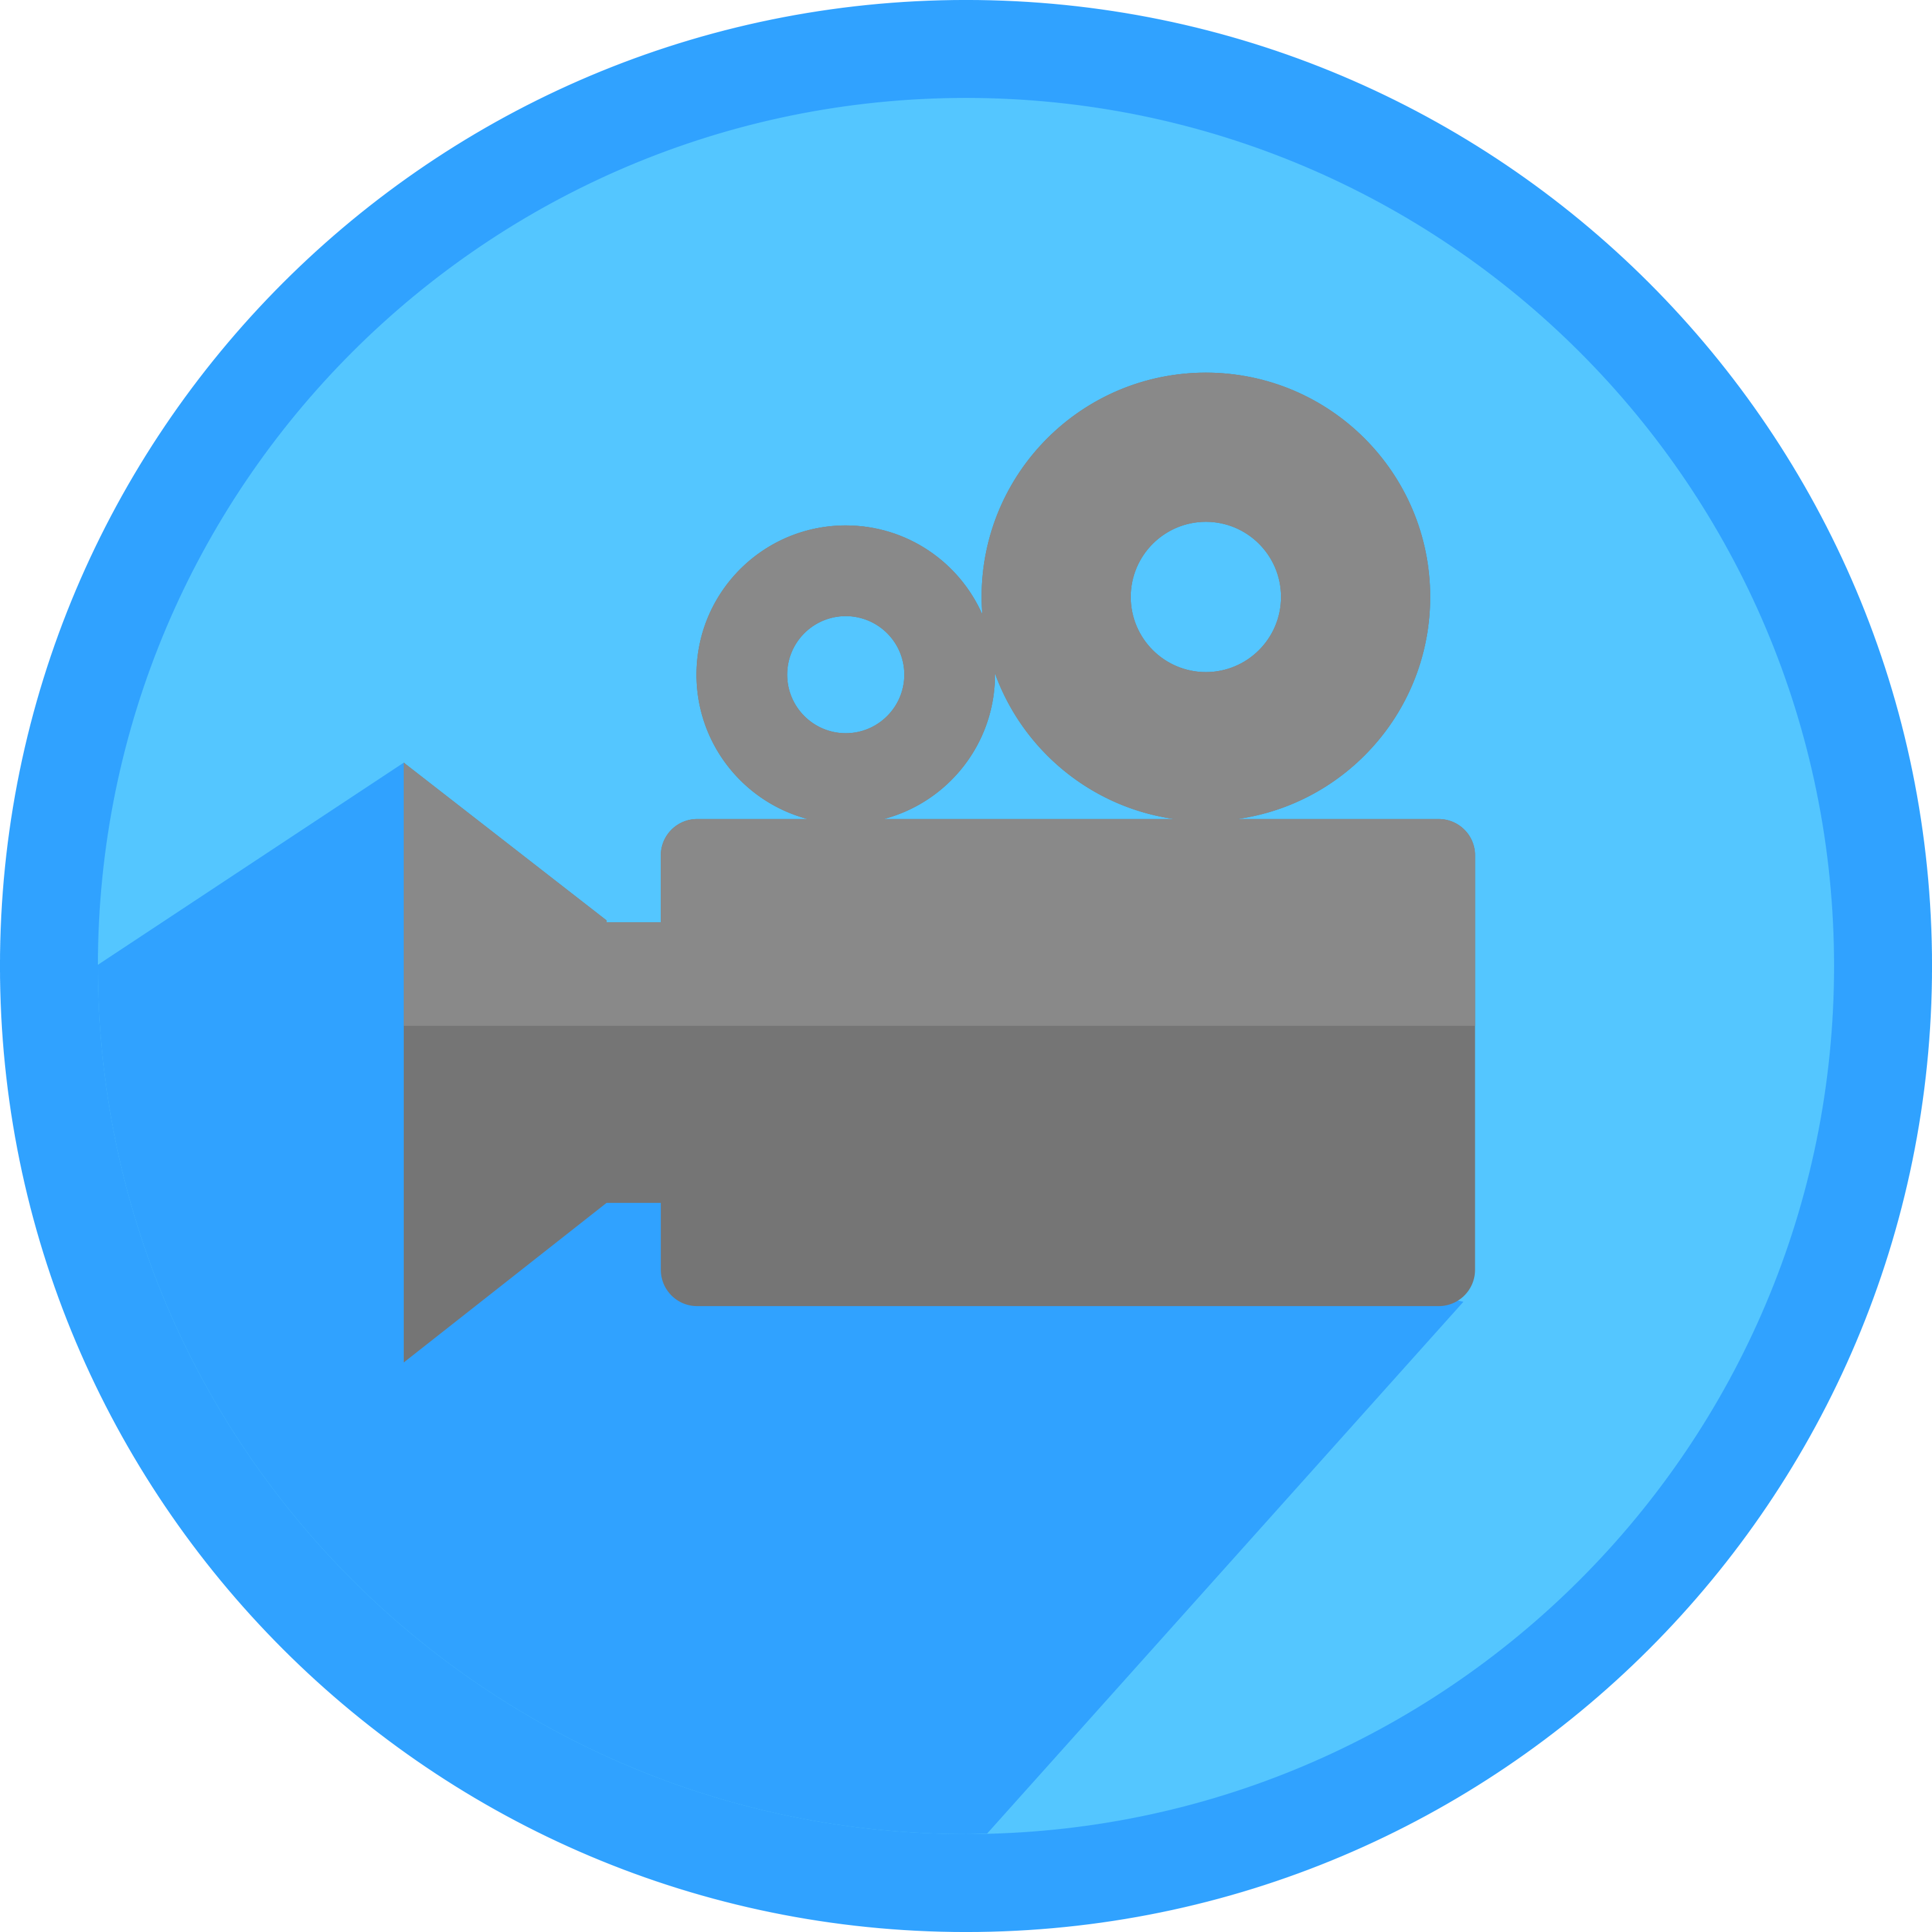 Video Recorder Png File - Video Recorder, Transparent background PNG HD thumbnail